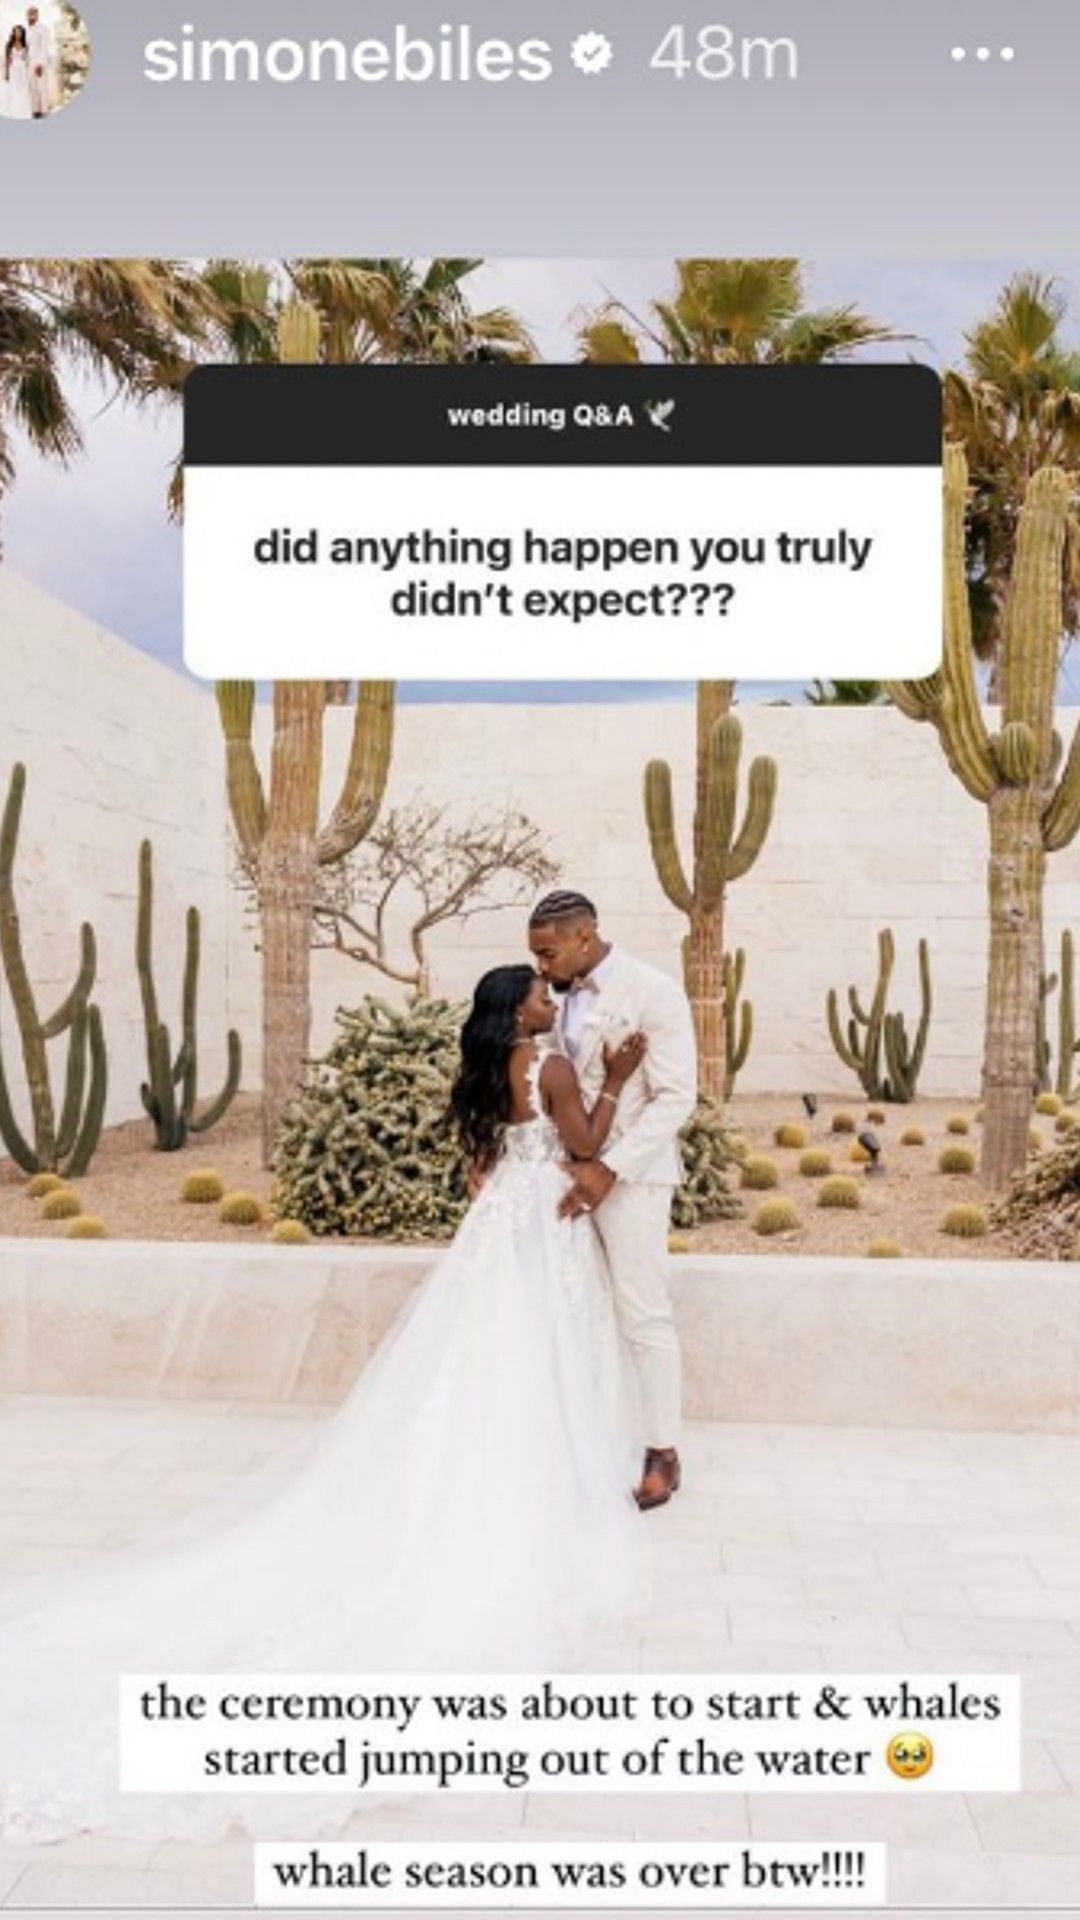 Simone Biles revealed a small detail about her wedding day earlier this month.